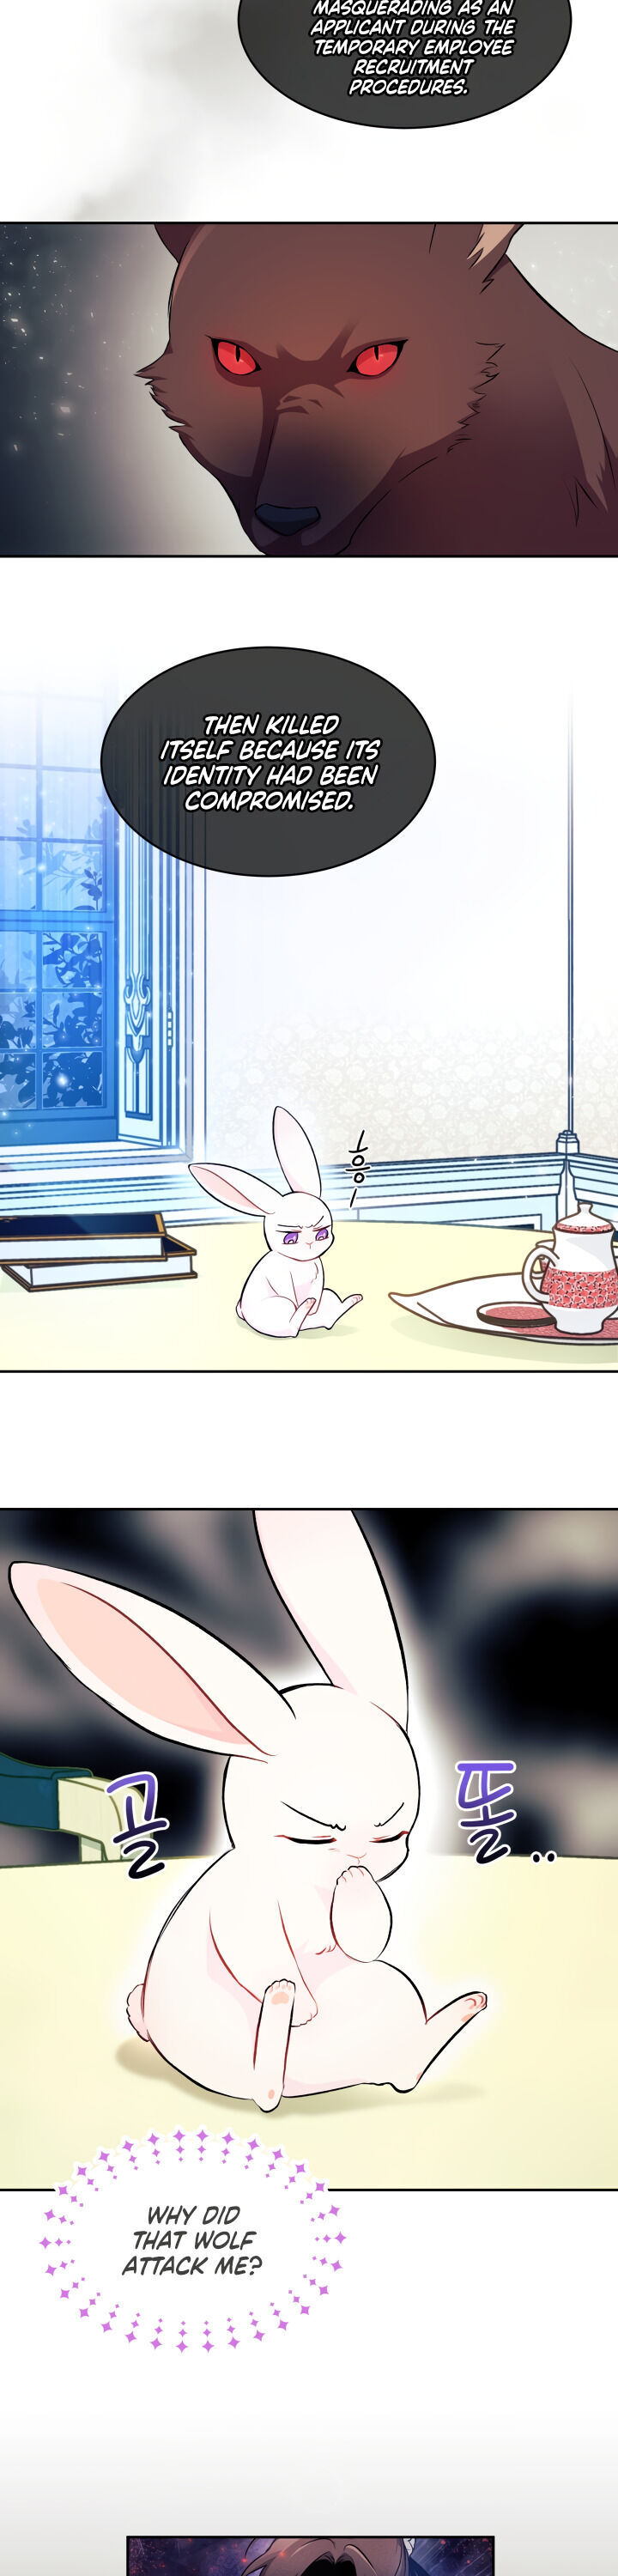 A Symbiotic Relationship Between A Rabbit And A Black Panther - Chapter 15 Page 2